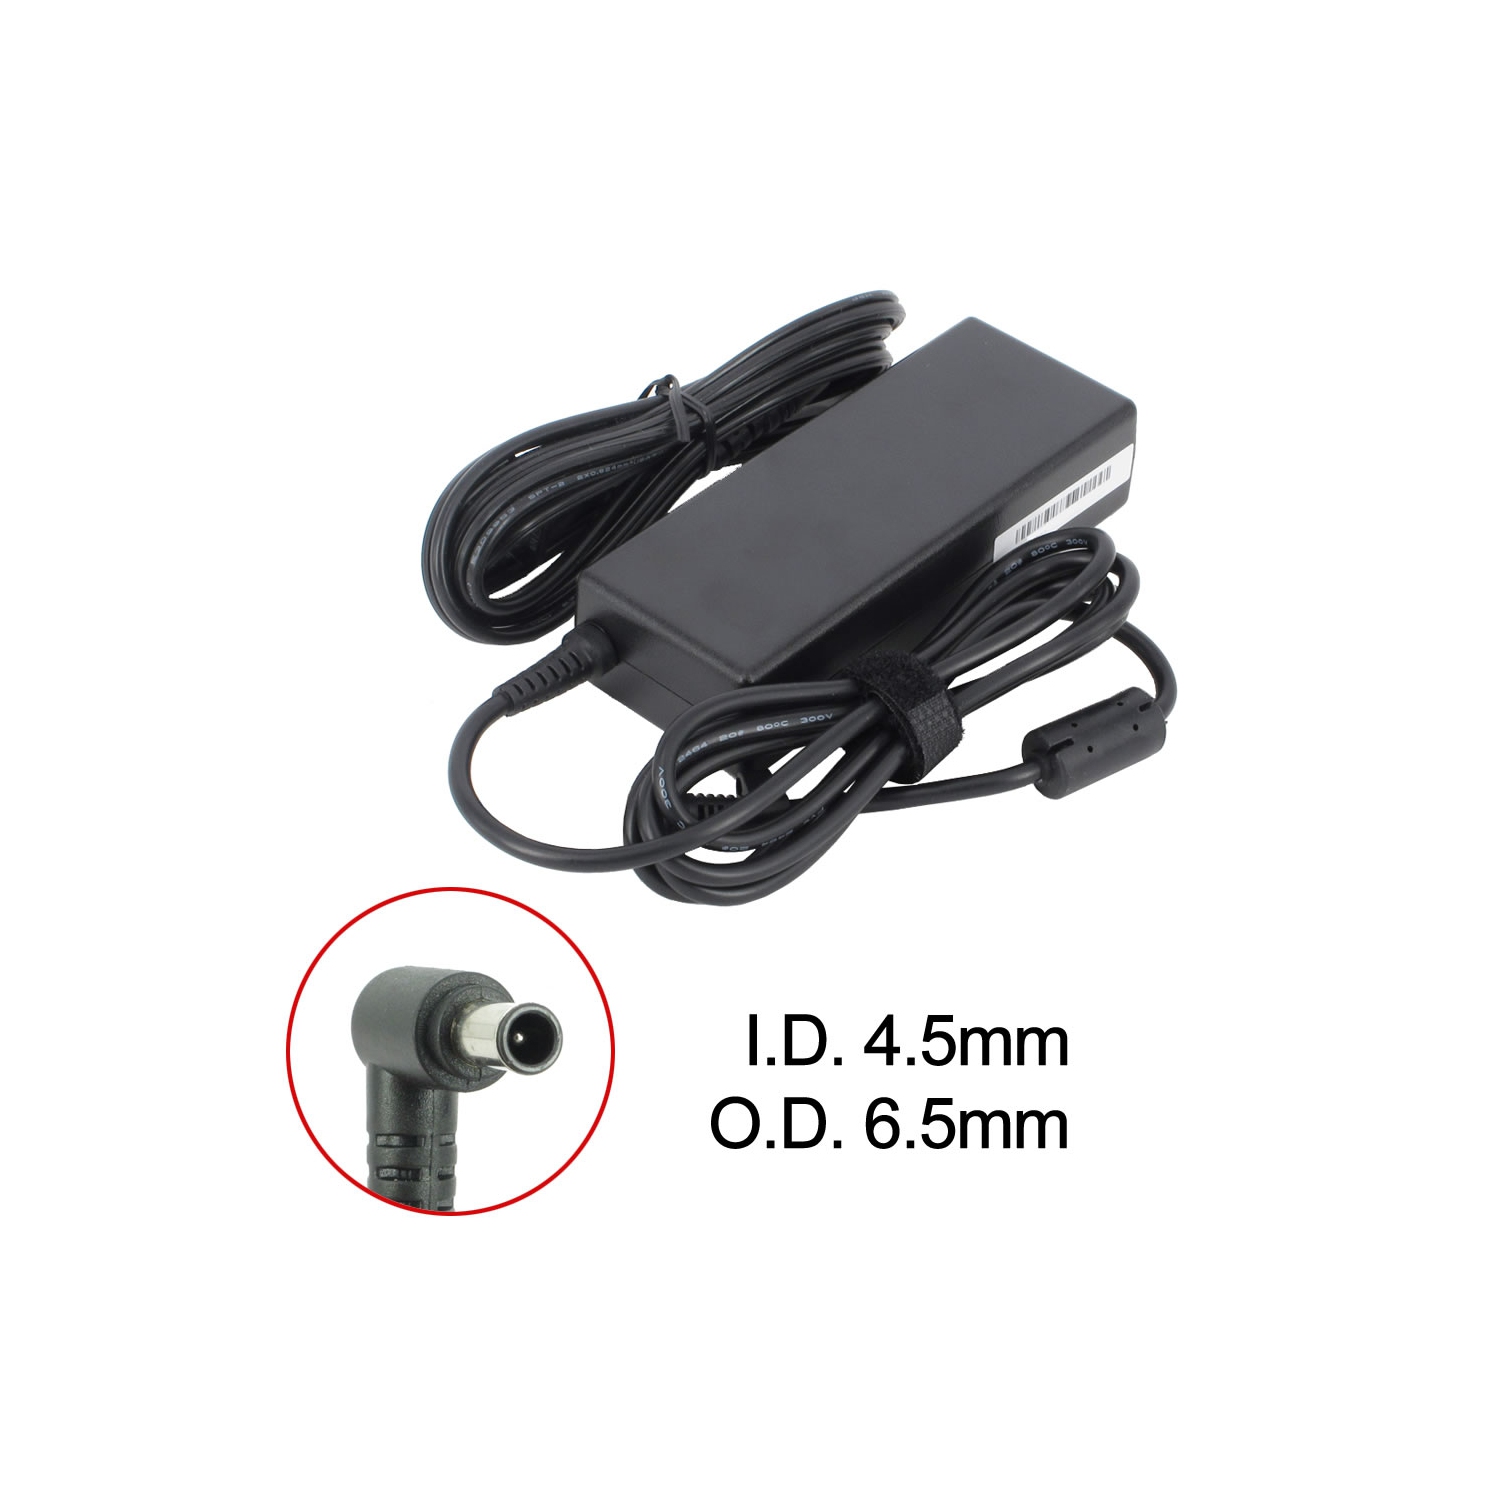 Brand New Laptop AC Adapter for Sony VAIO VGN-FE780 Series, PCGA-AC19V10, PCGA-AC19V3, VGP-AC19V20, VGP-AC19V30, VGP-AC19V51